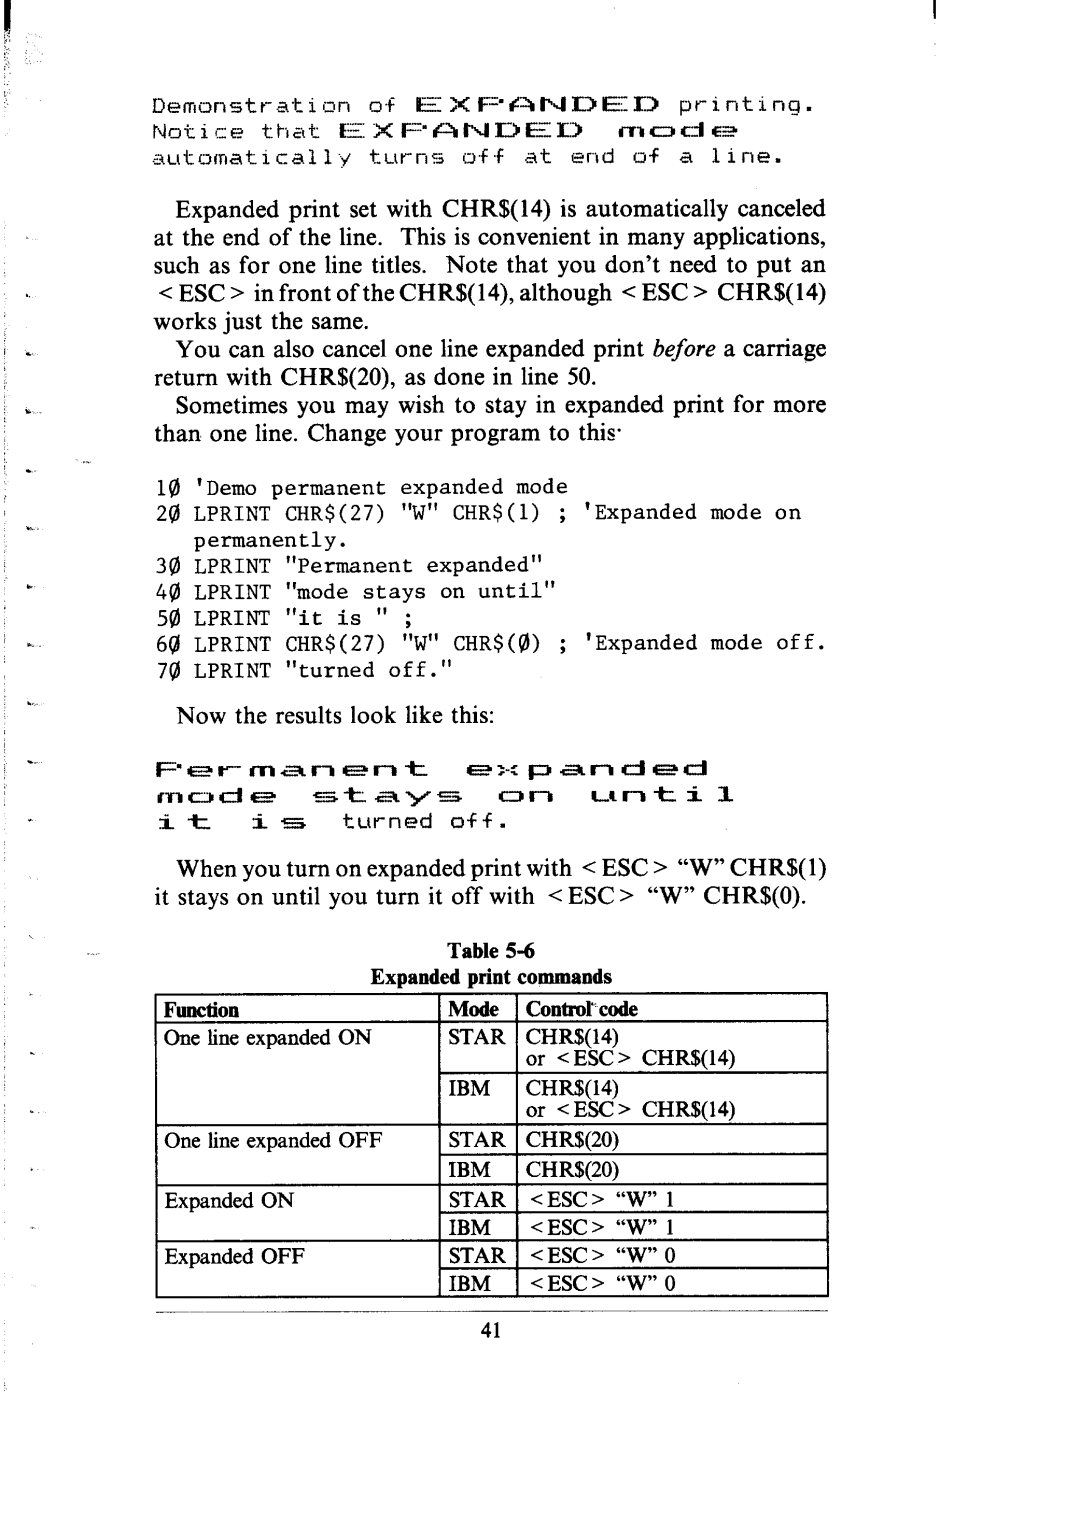 Star Micronics SR-10/I5 user manual Now the results look like this 